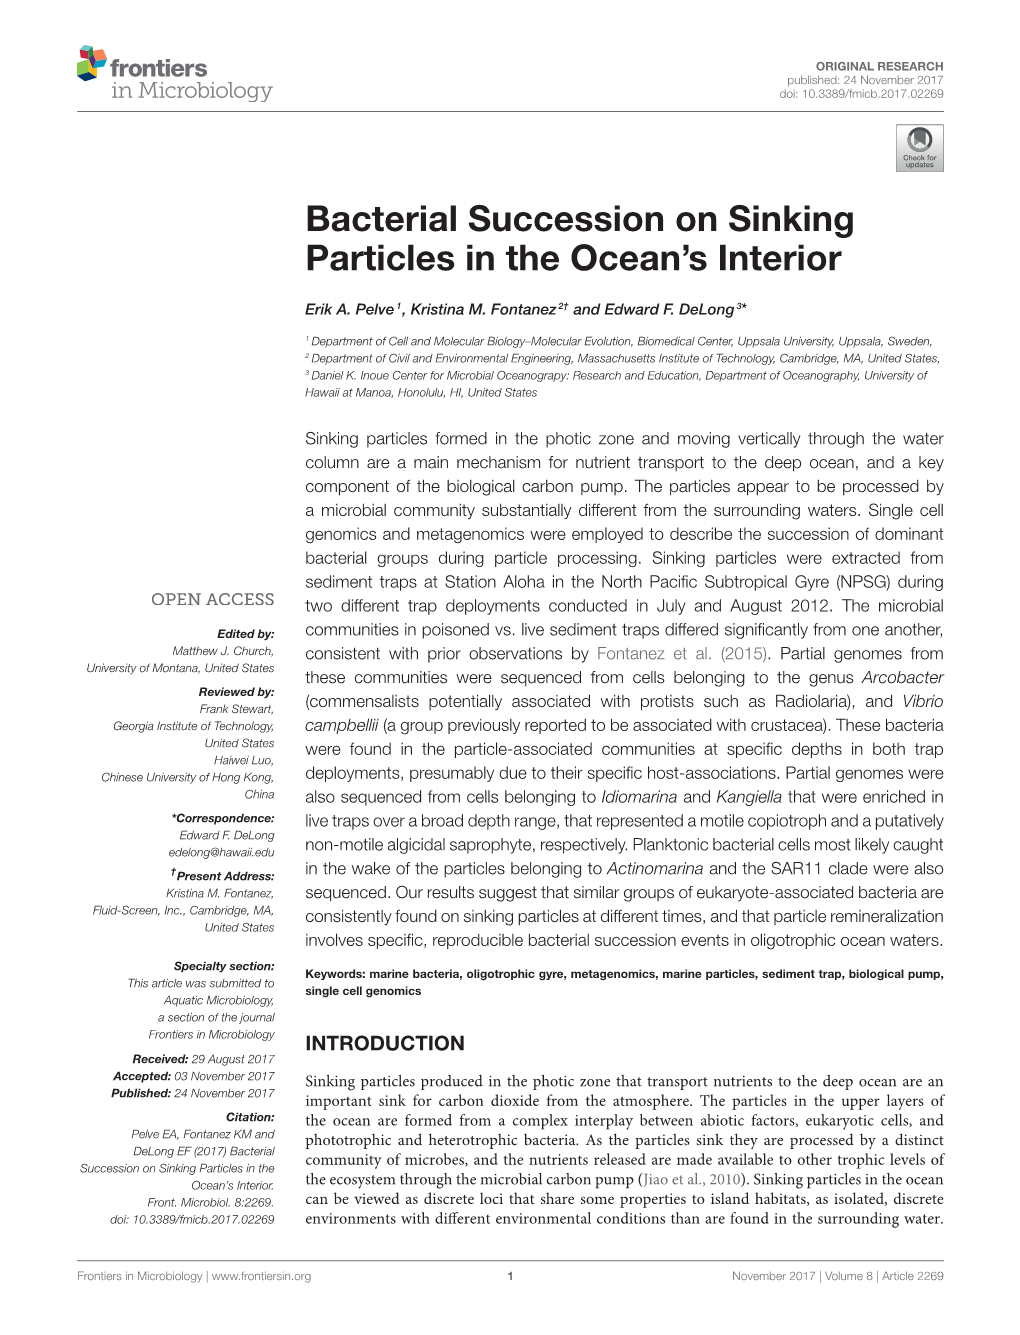 Bacterial Succession on Sinking Particles in the Ocean's Interior